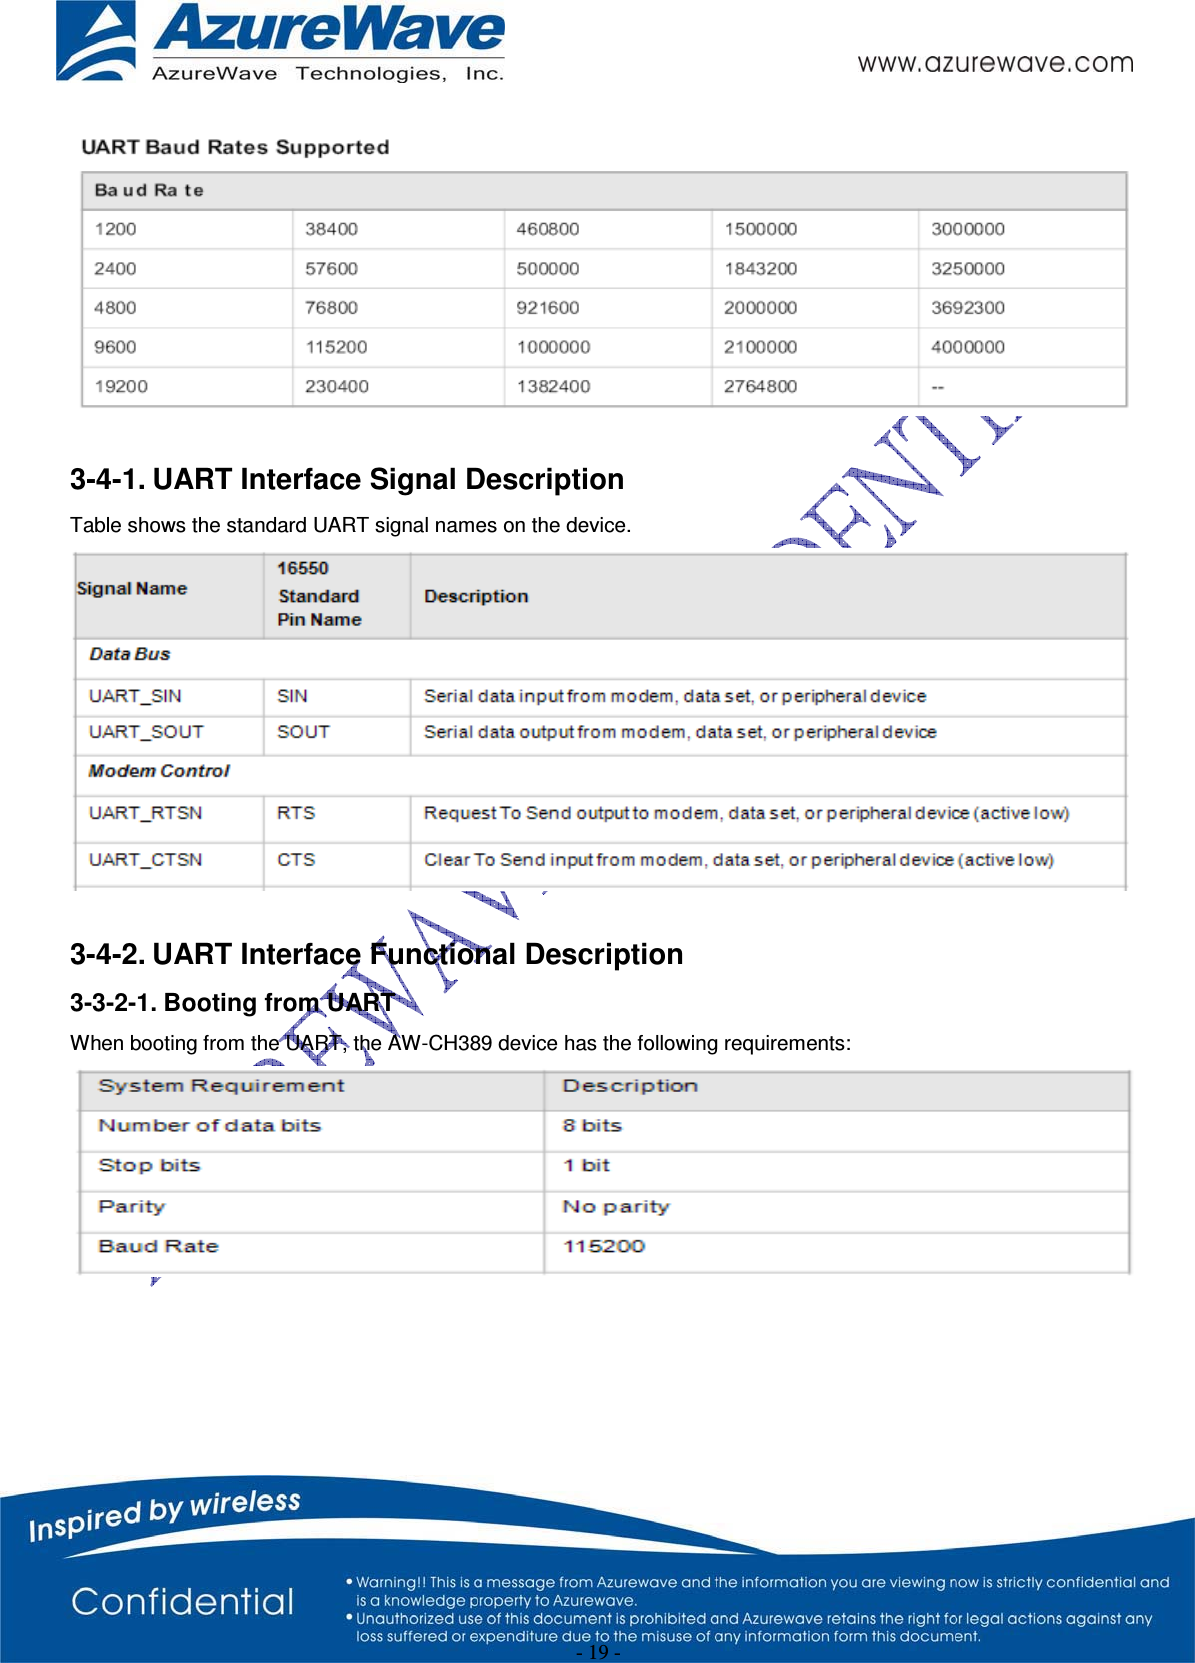 - 19 - 3-4-1. UART Interface Signal Description Table shows the standard UART signal names on the device. 3-4-2. UART Interface Functional Description 3-3-2-1. Booting from UART When booting from the UART, the AW-CH389 device has the following requirements: 